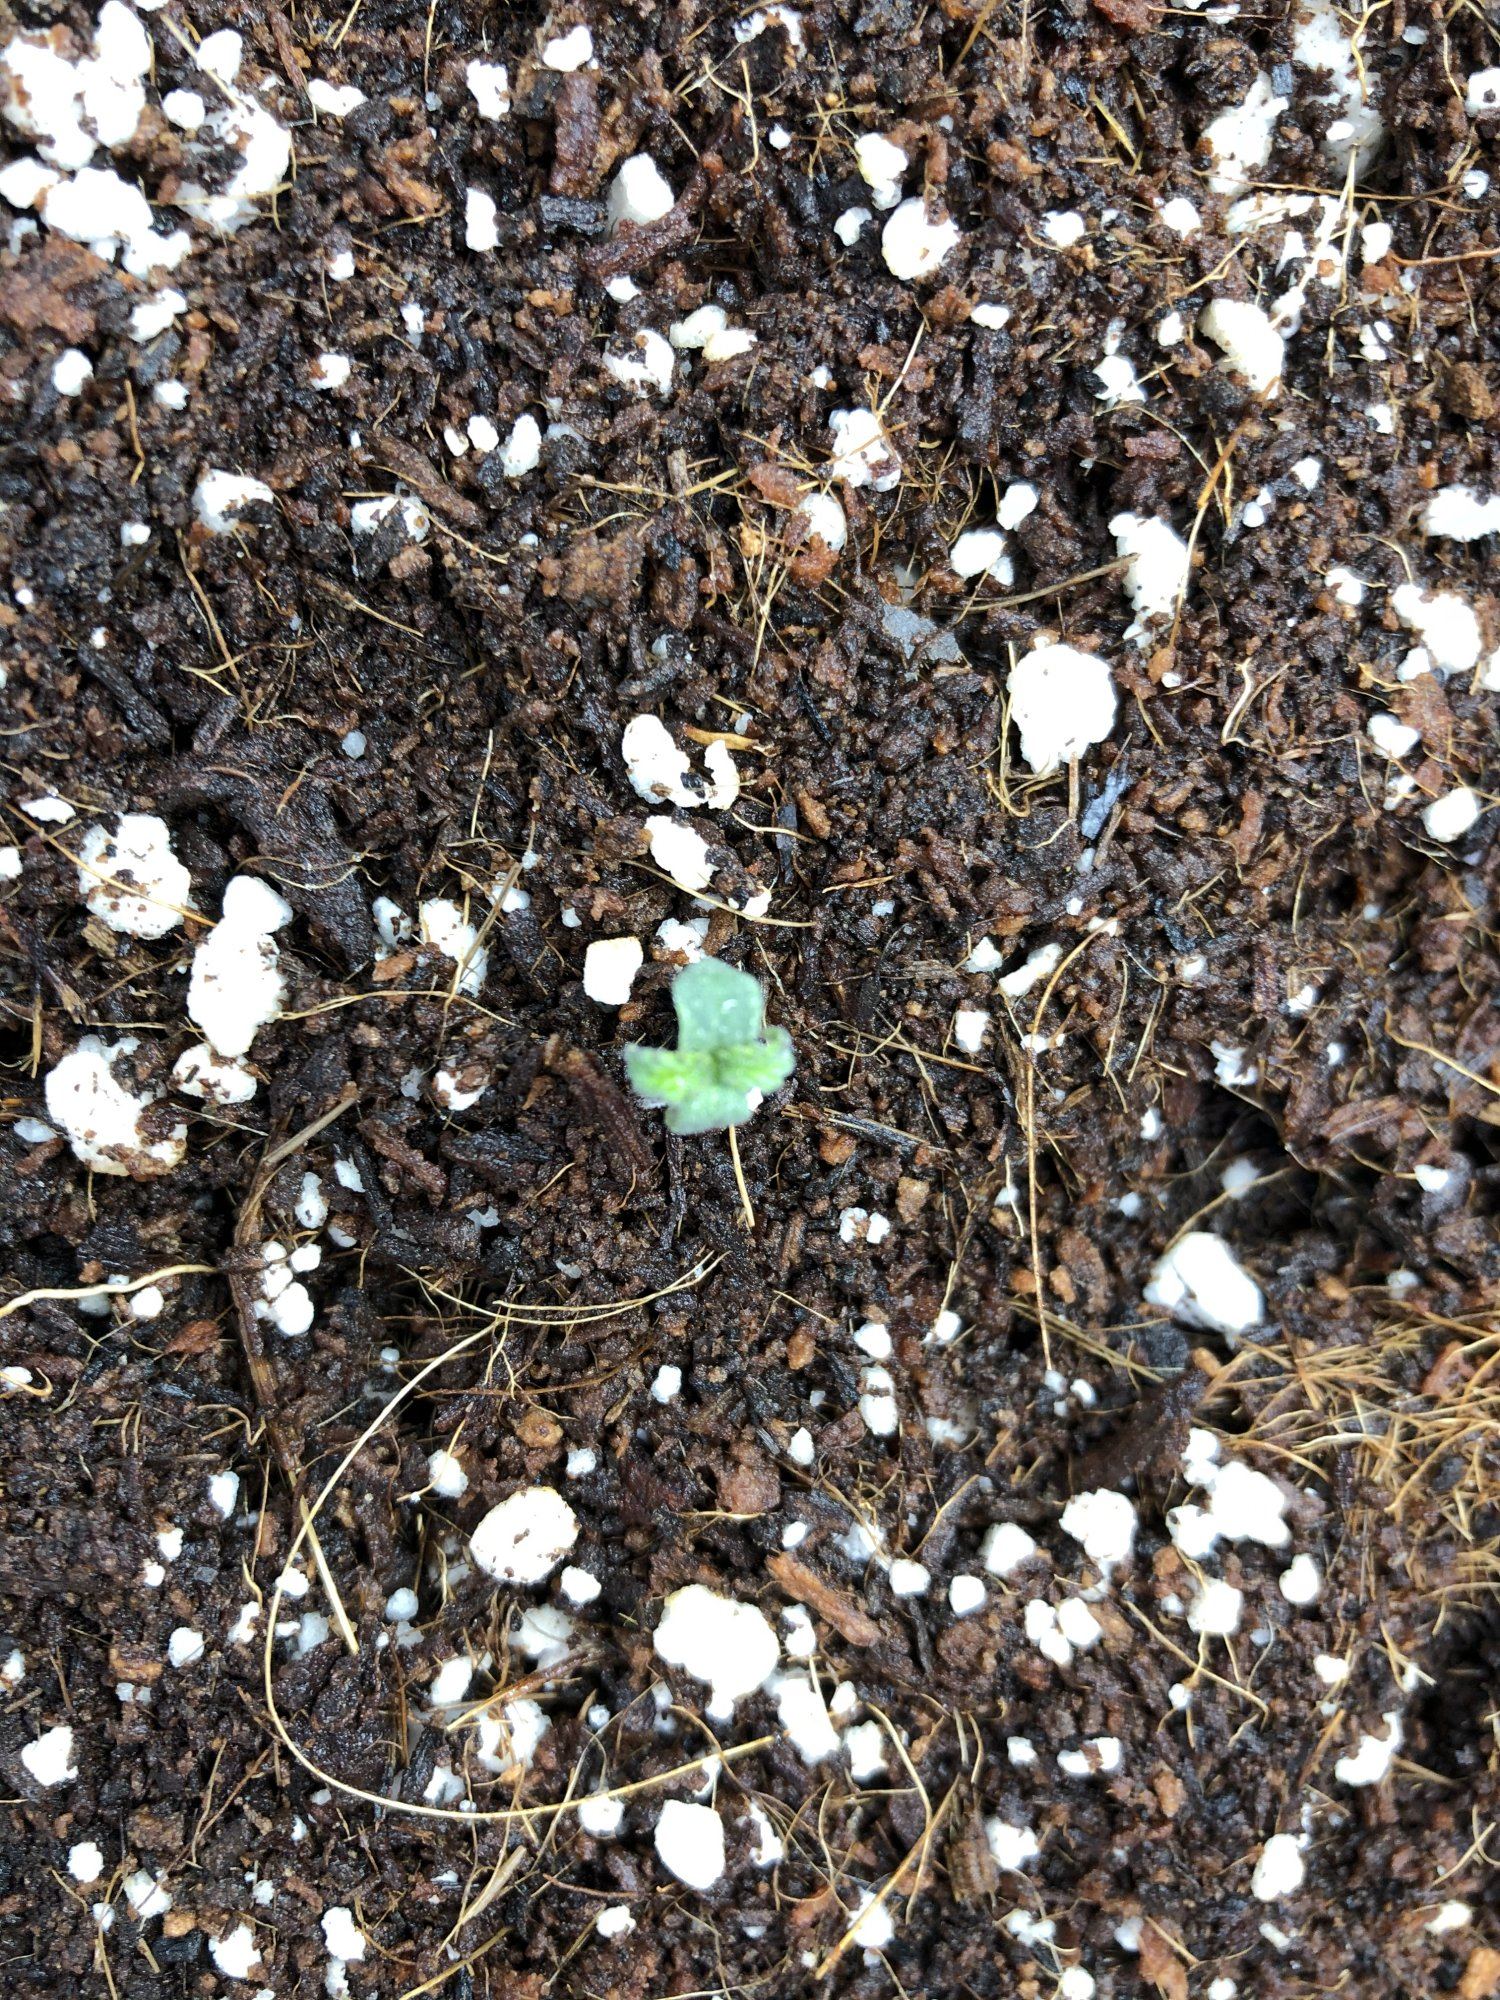 Not sure whats good with new seedling 2